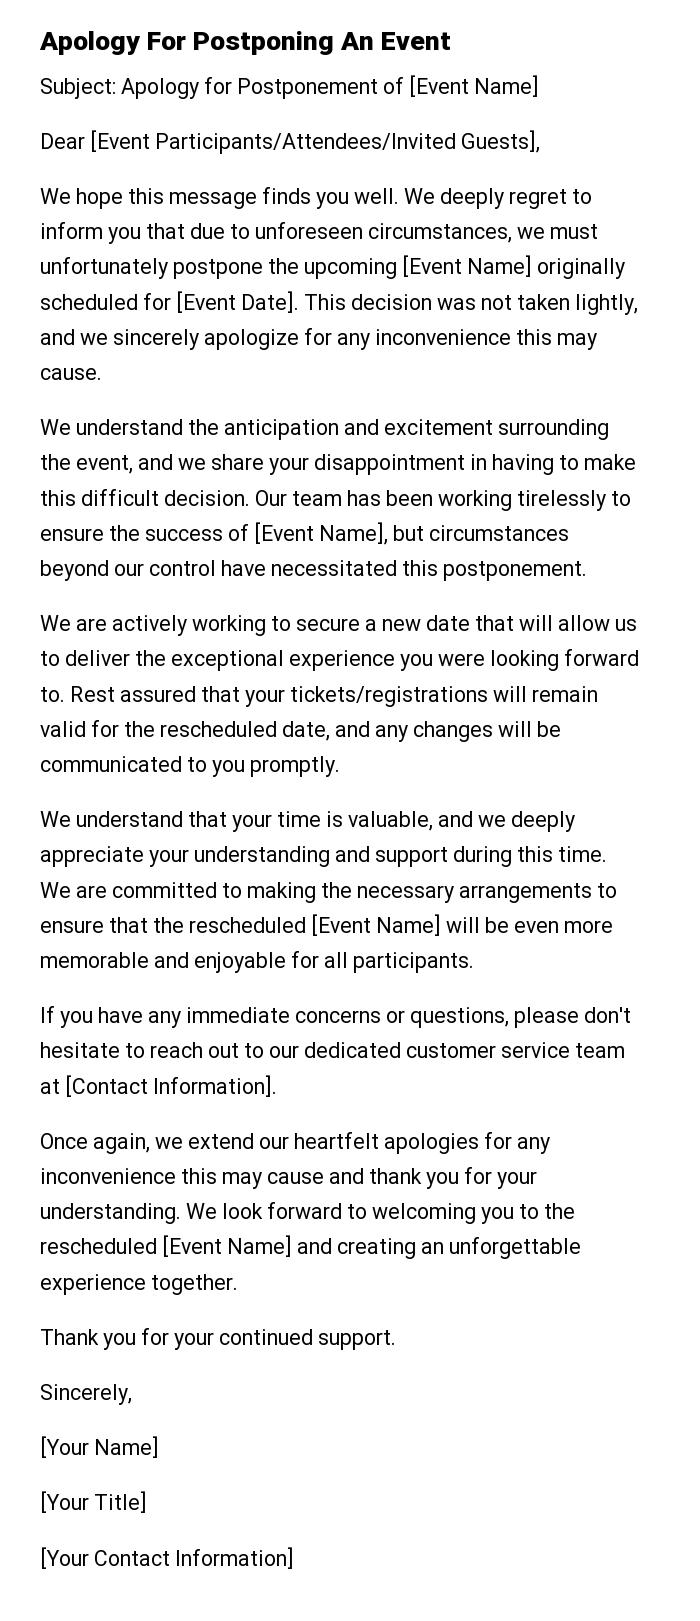 Apology For Postponing An Event